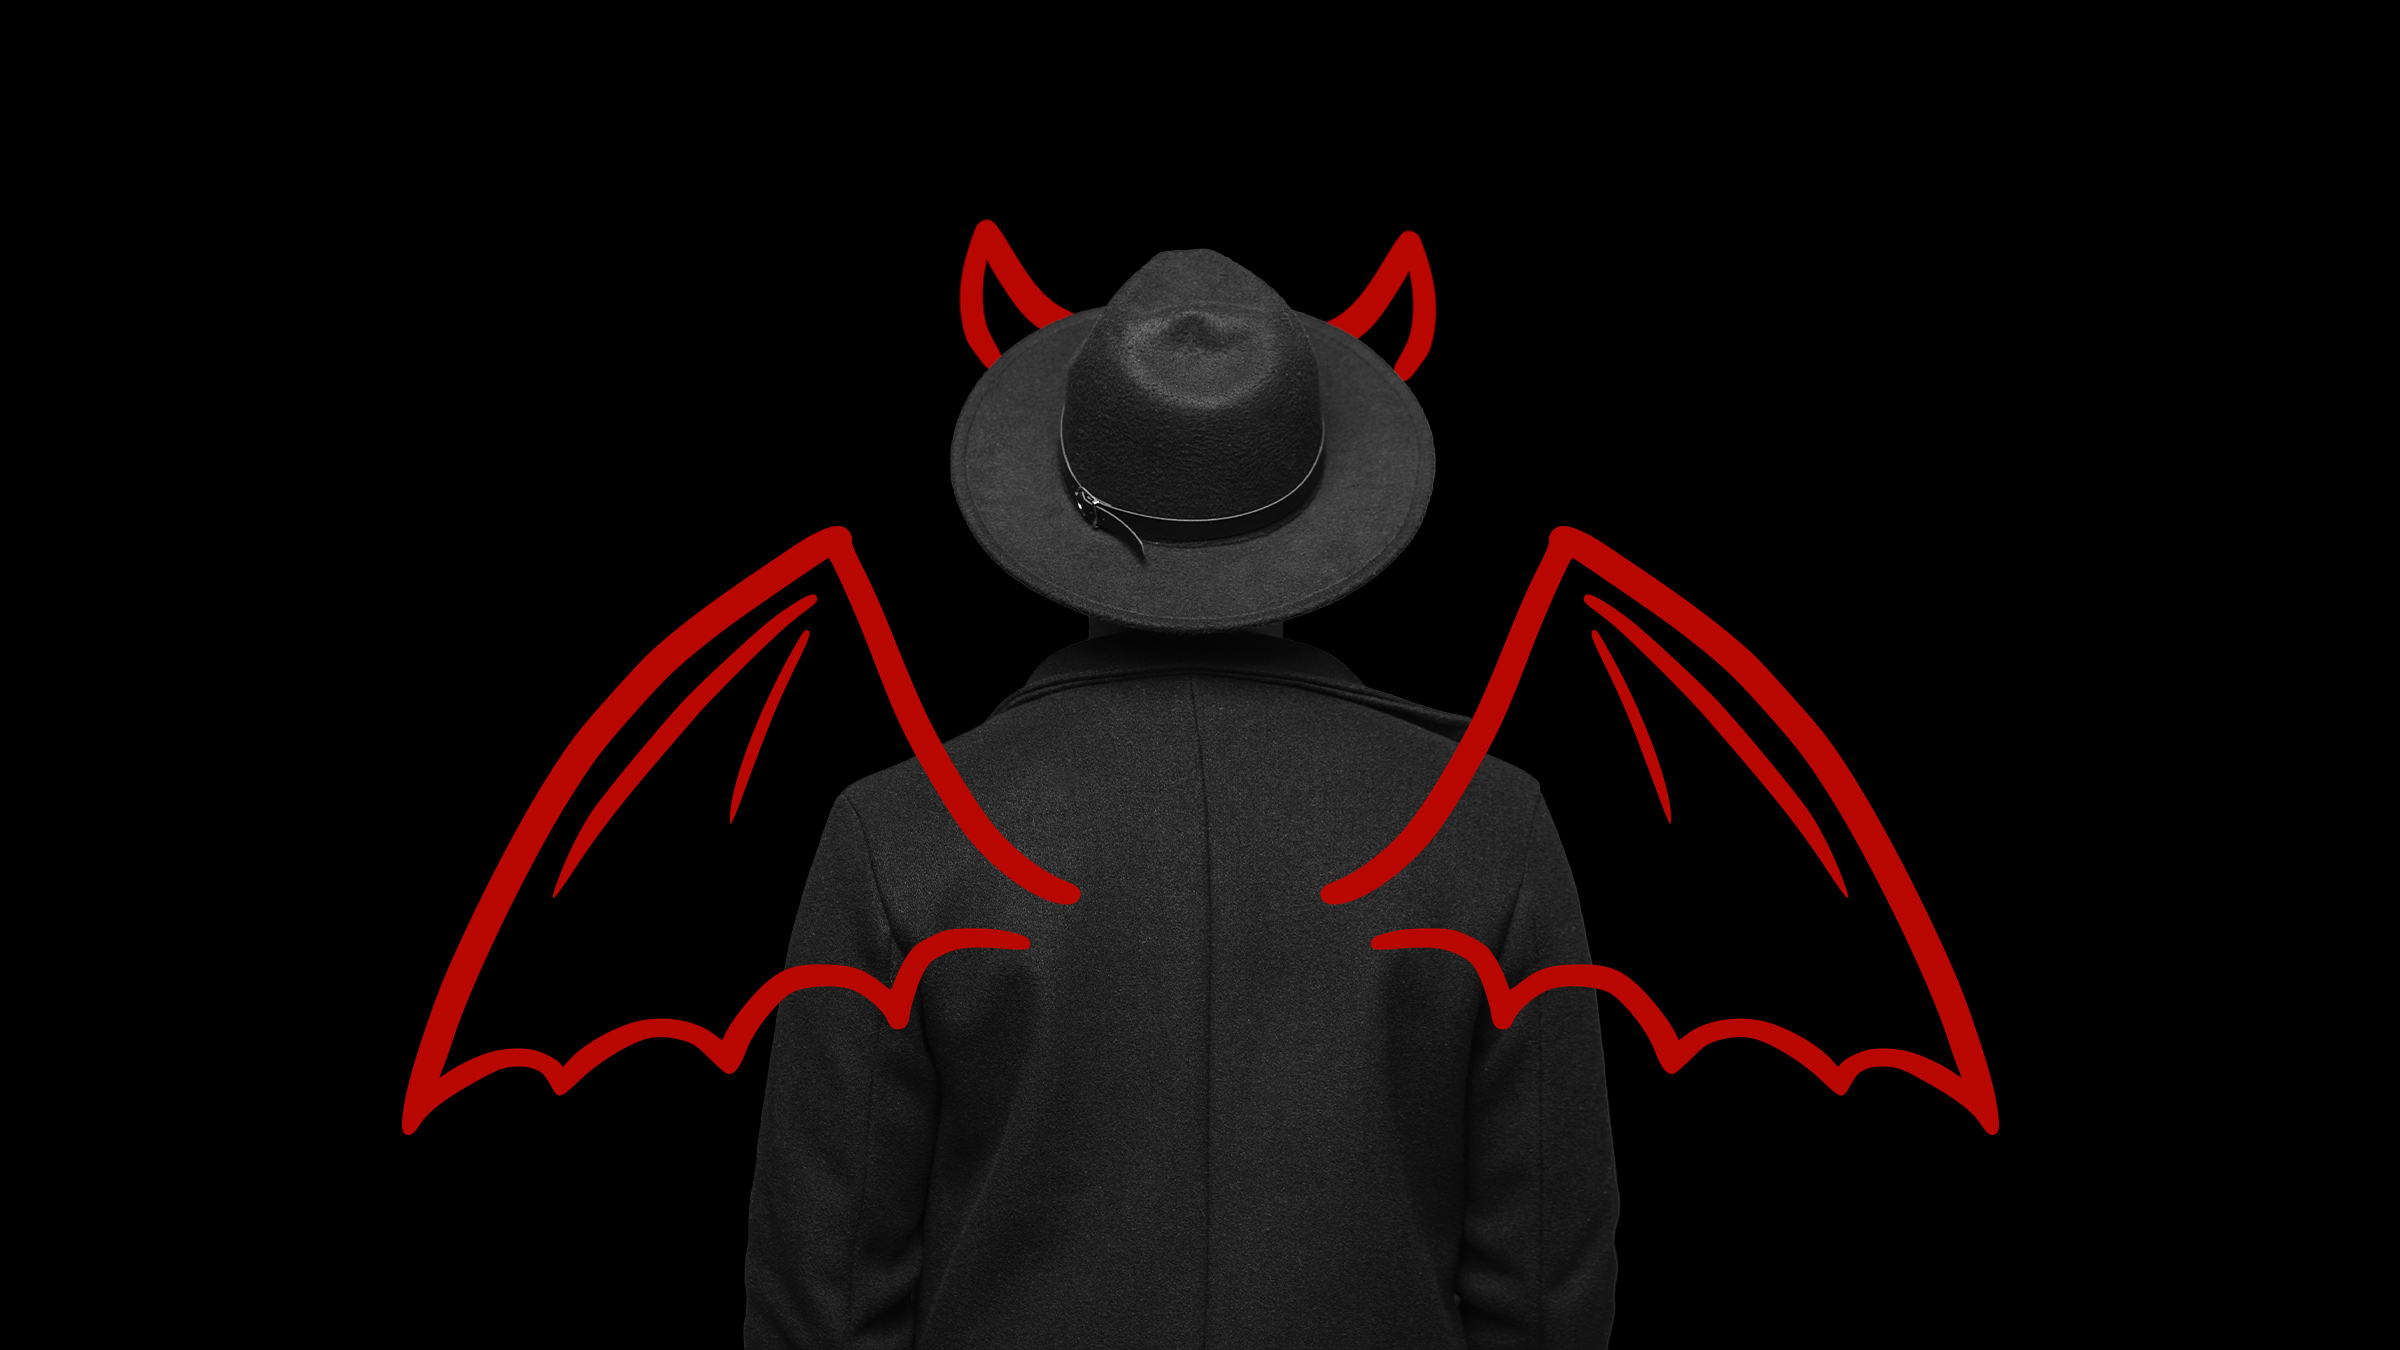 What To Attain When the Devil Wears [Your Brand]